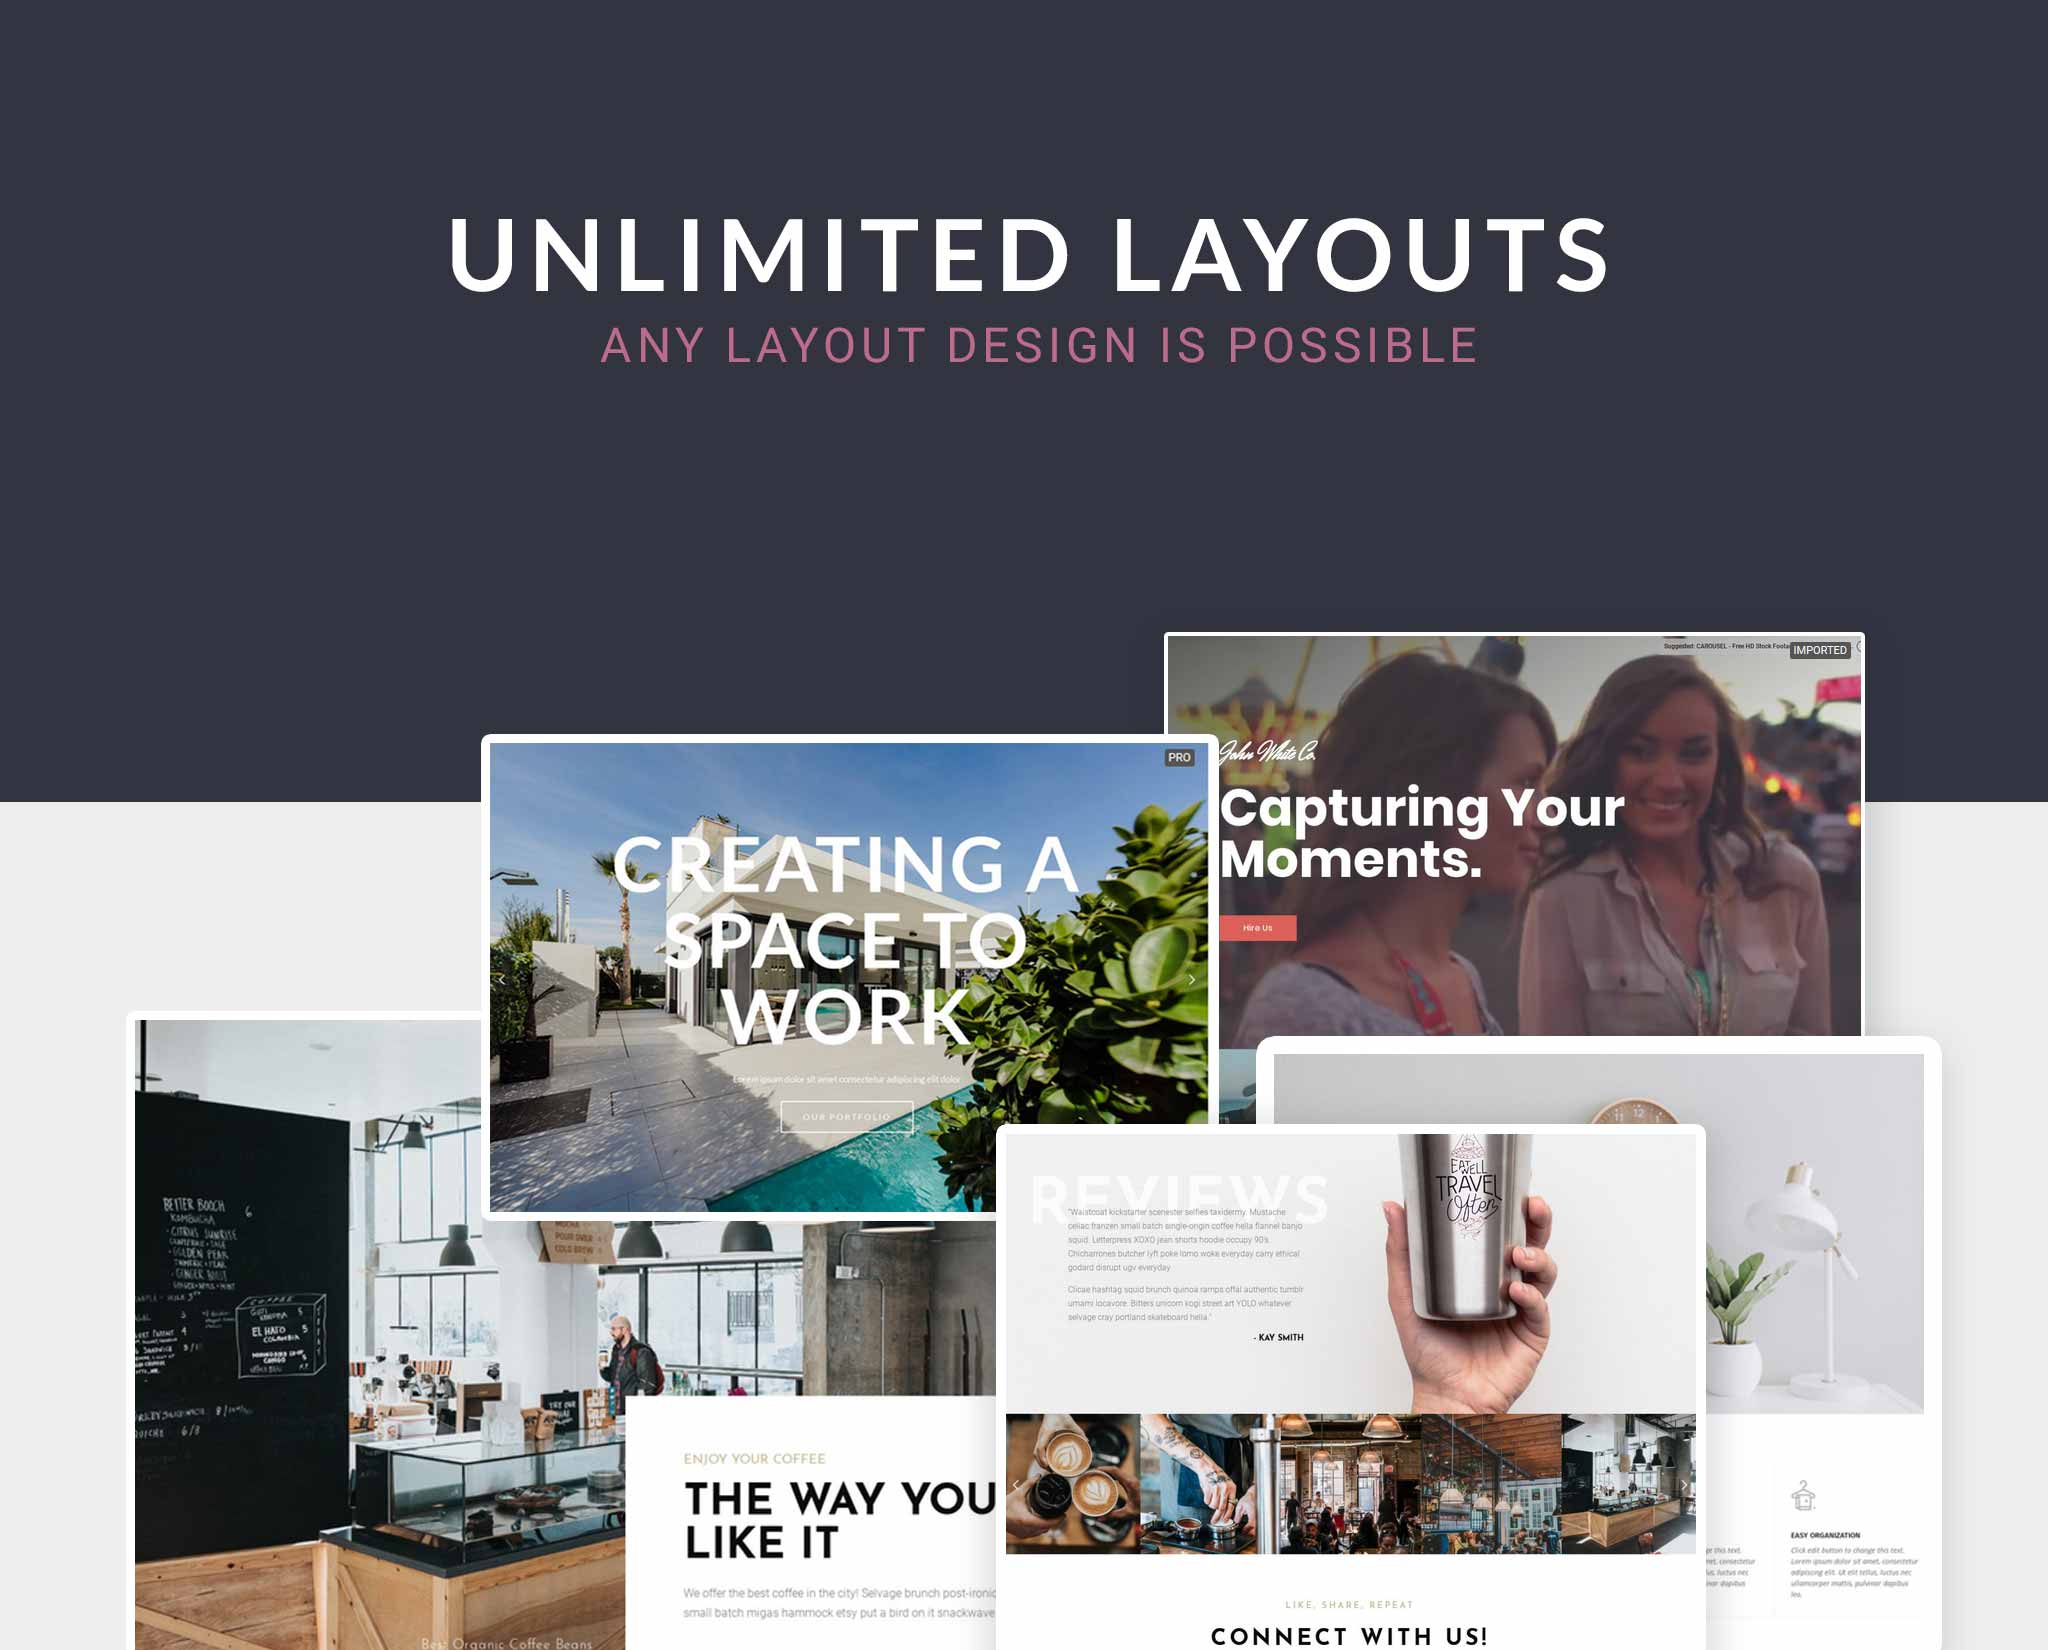 Unlimited layouts